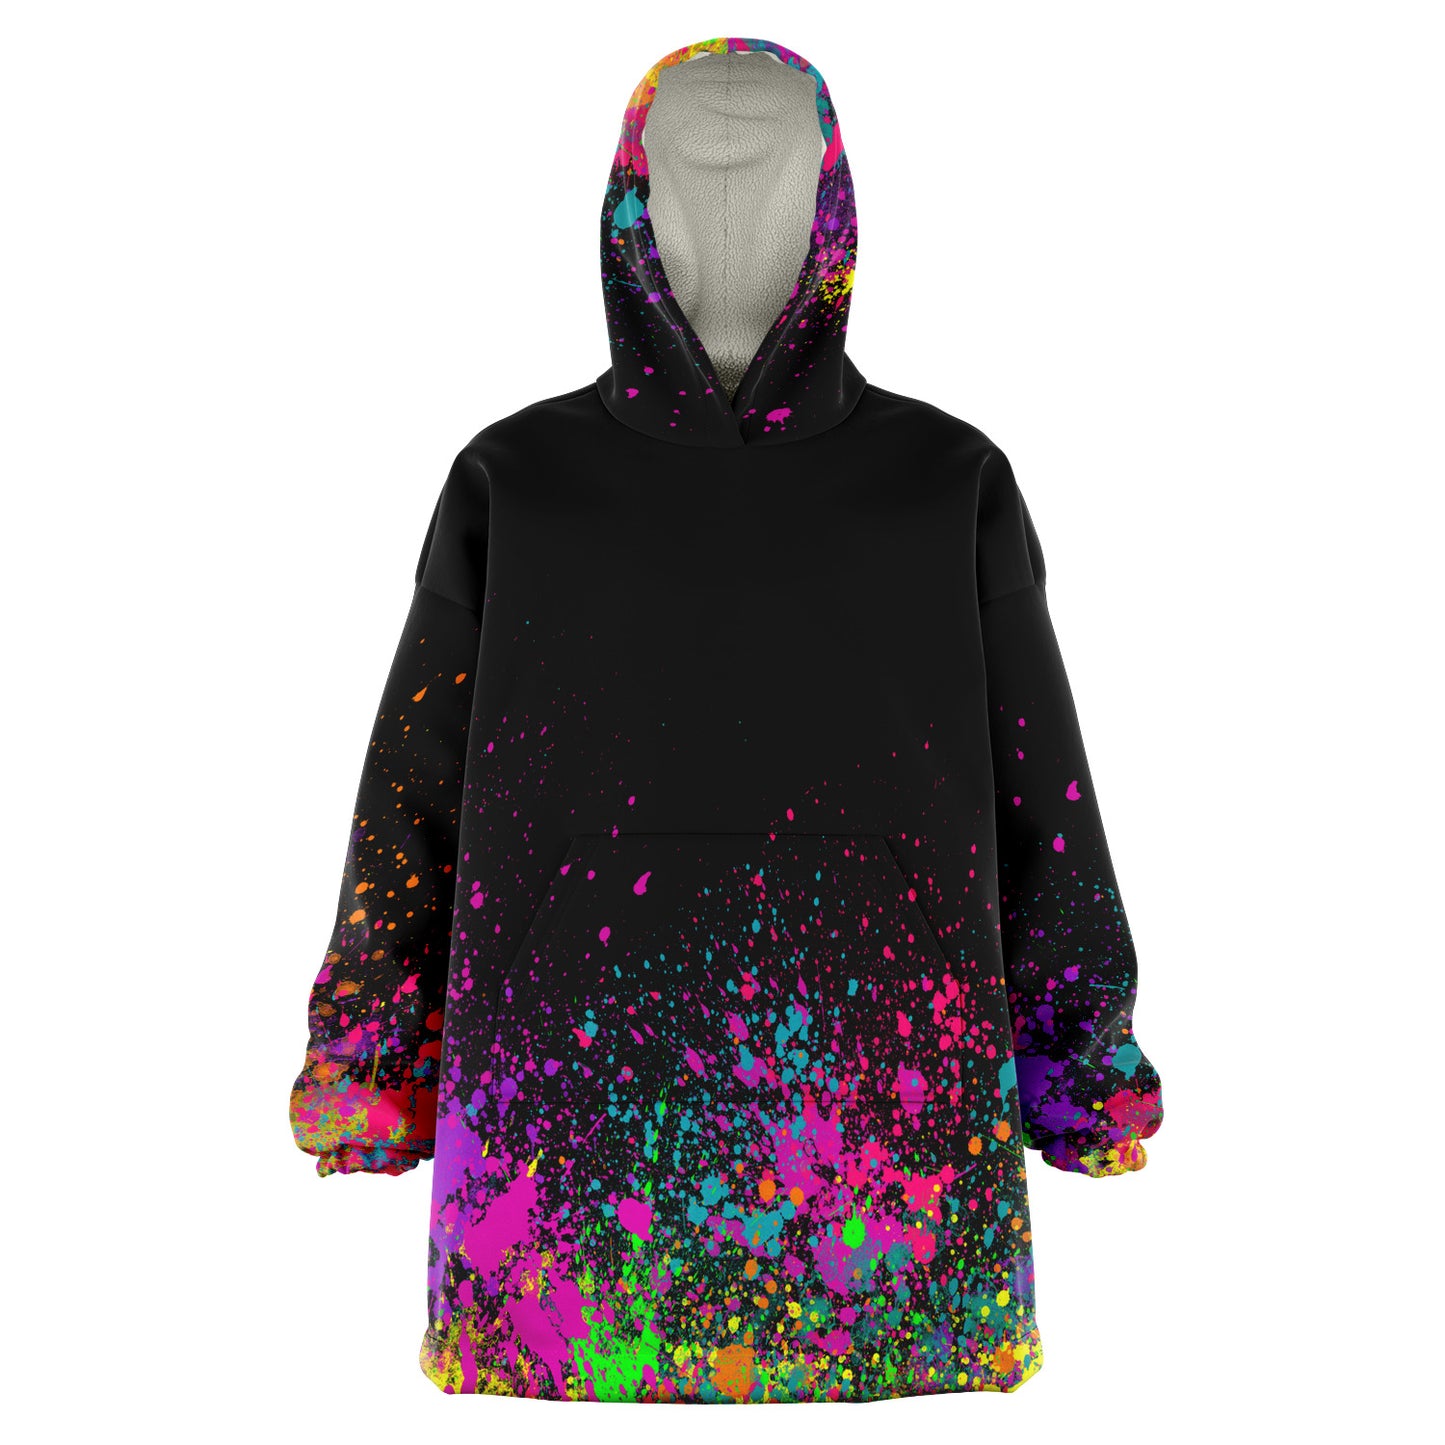 Paint Splatter Snuggle Hood for Artists and entertainers